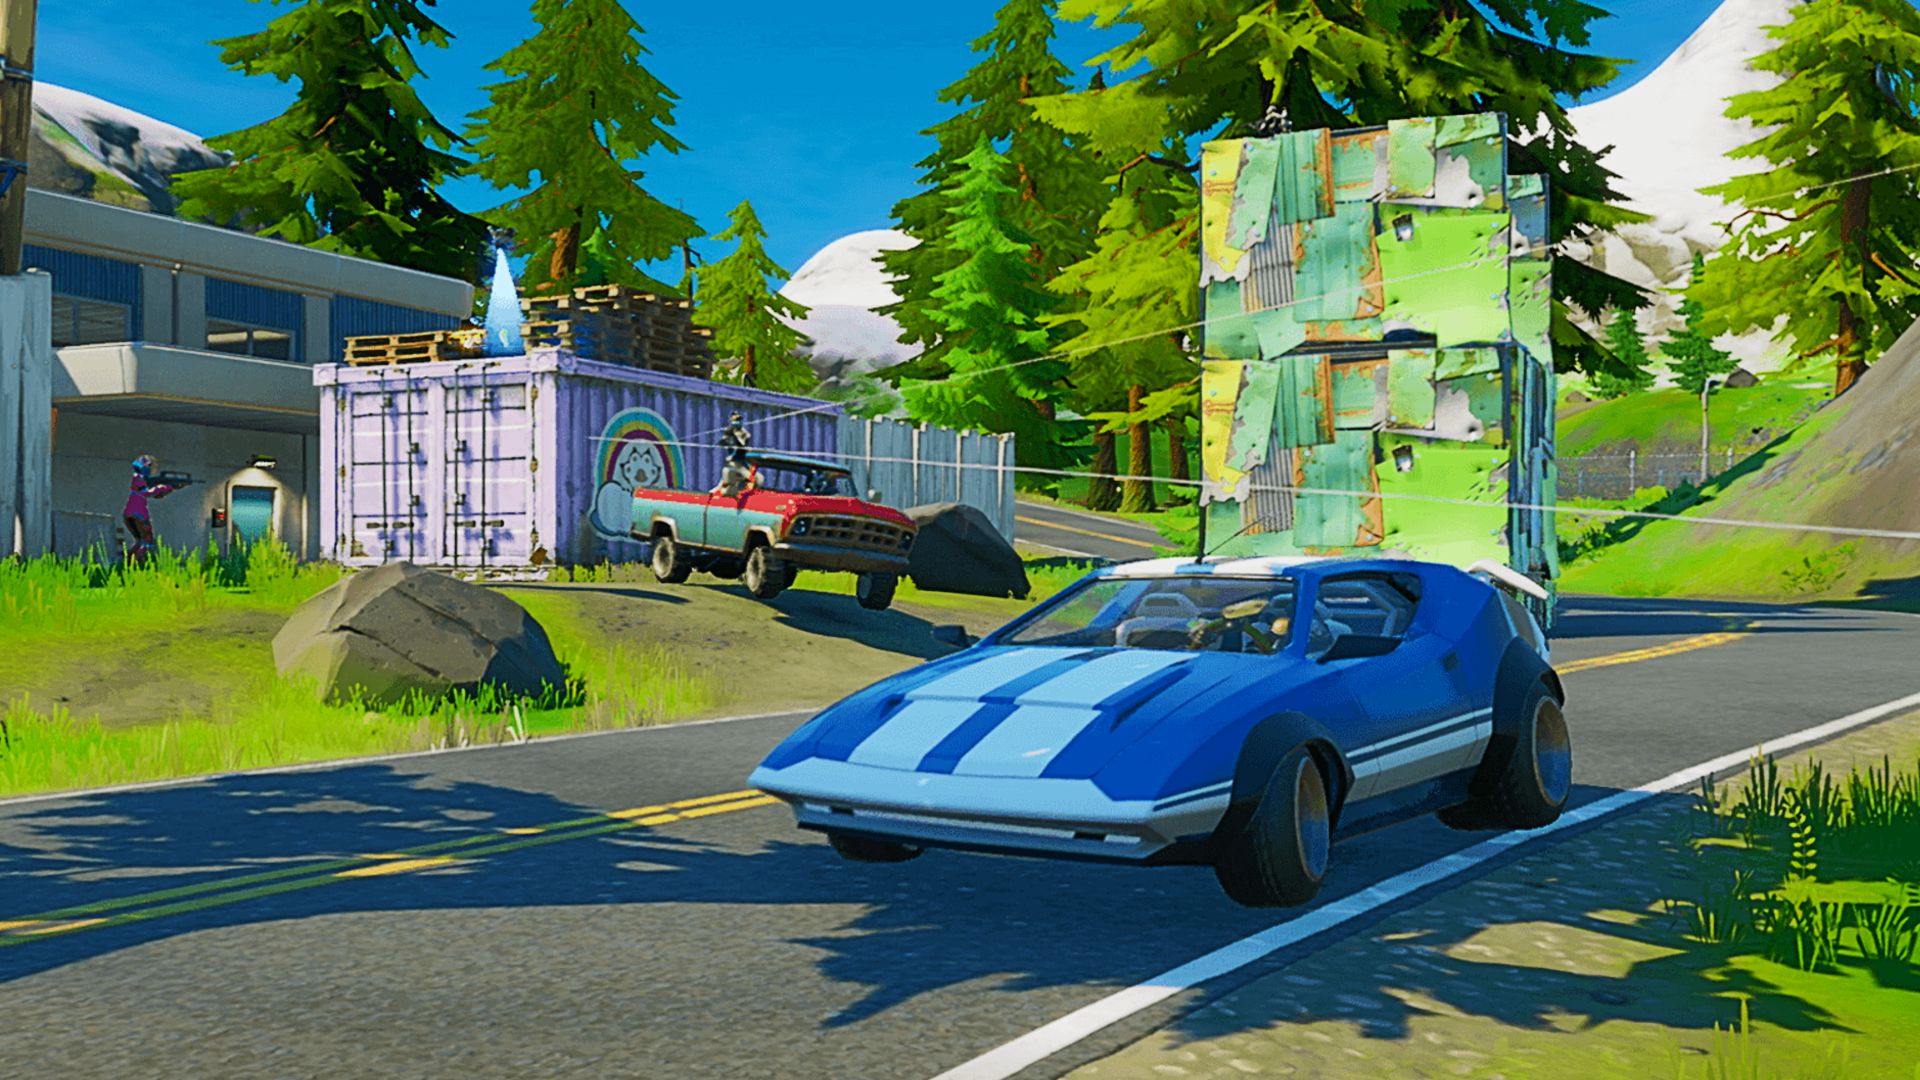 fortnite-cars-how-fortnite-vehicles-work-and-where-to-find-them-pcgamesn